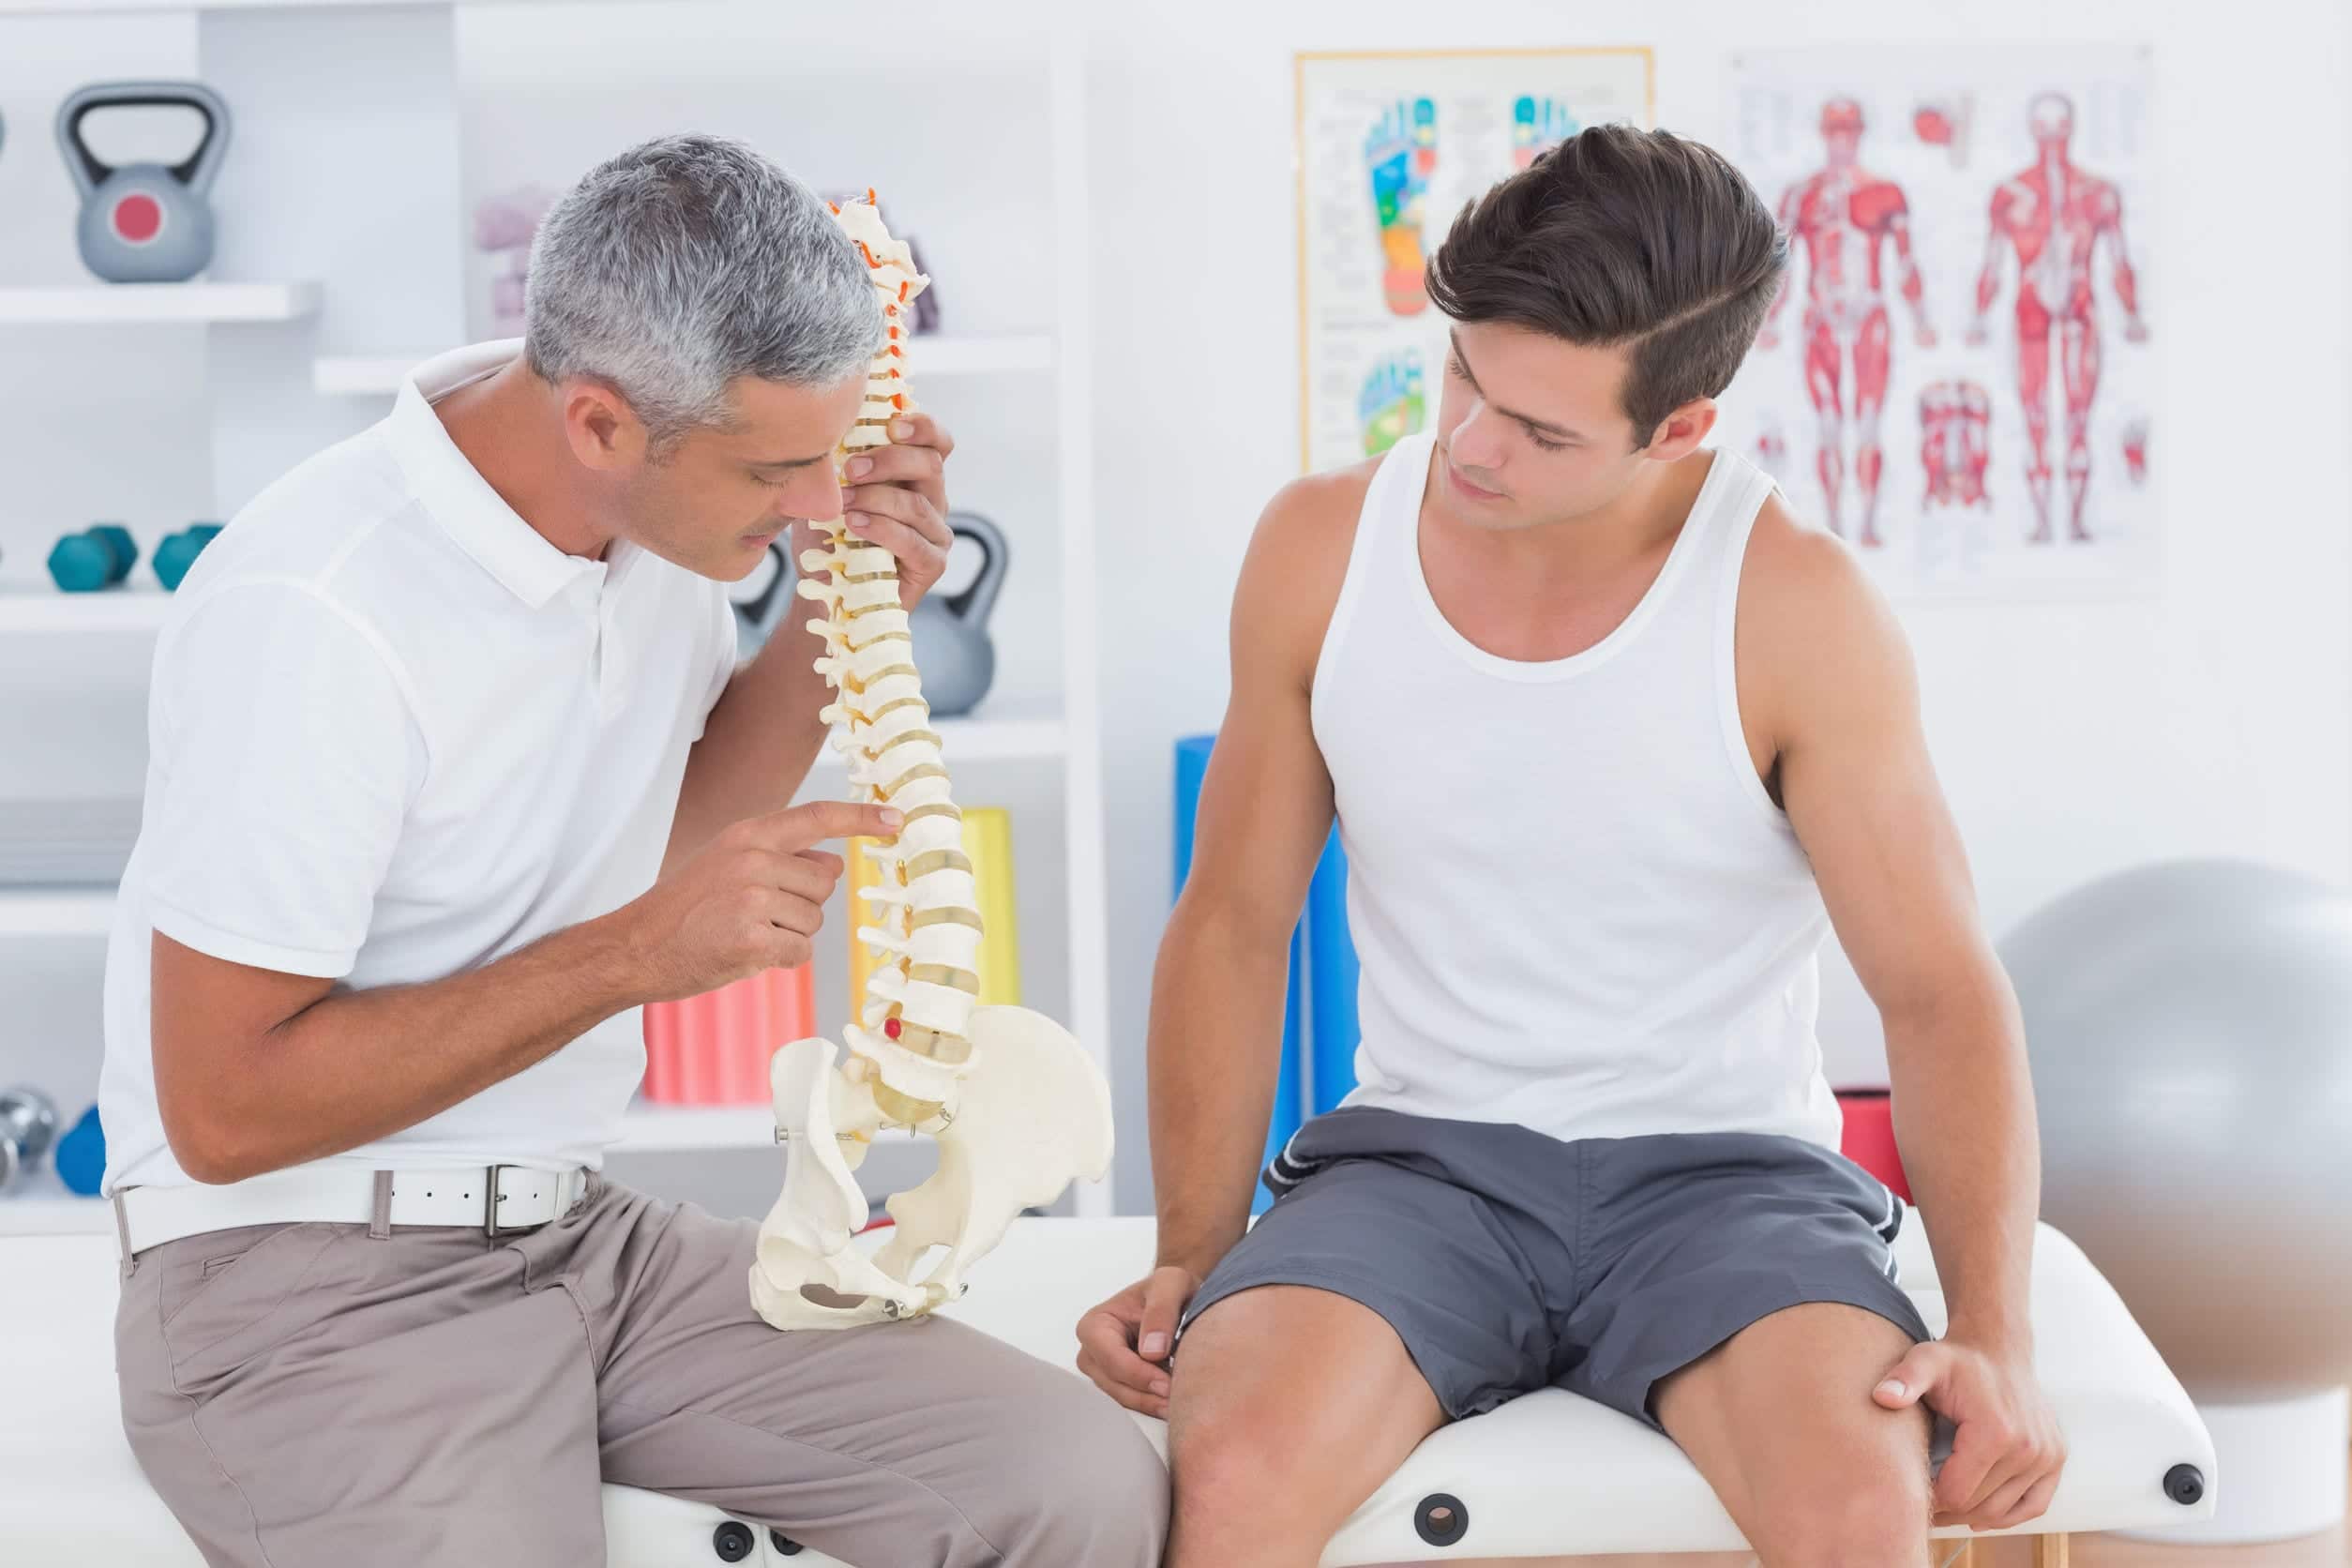 Chiropractic Care As A Non-Invasive and Drugless Treatment Option